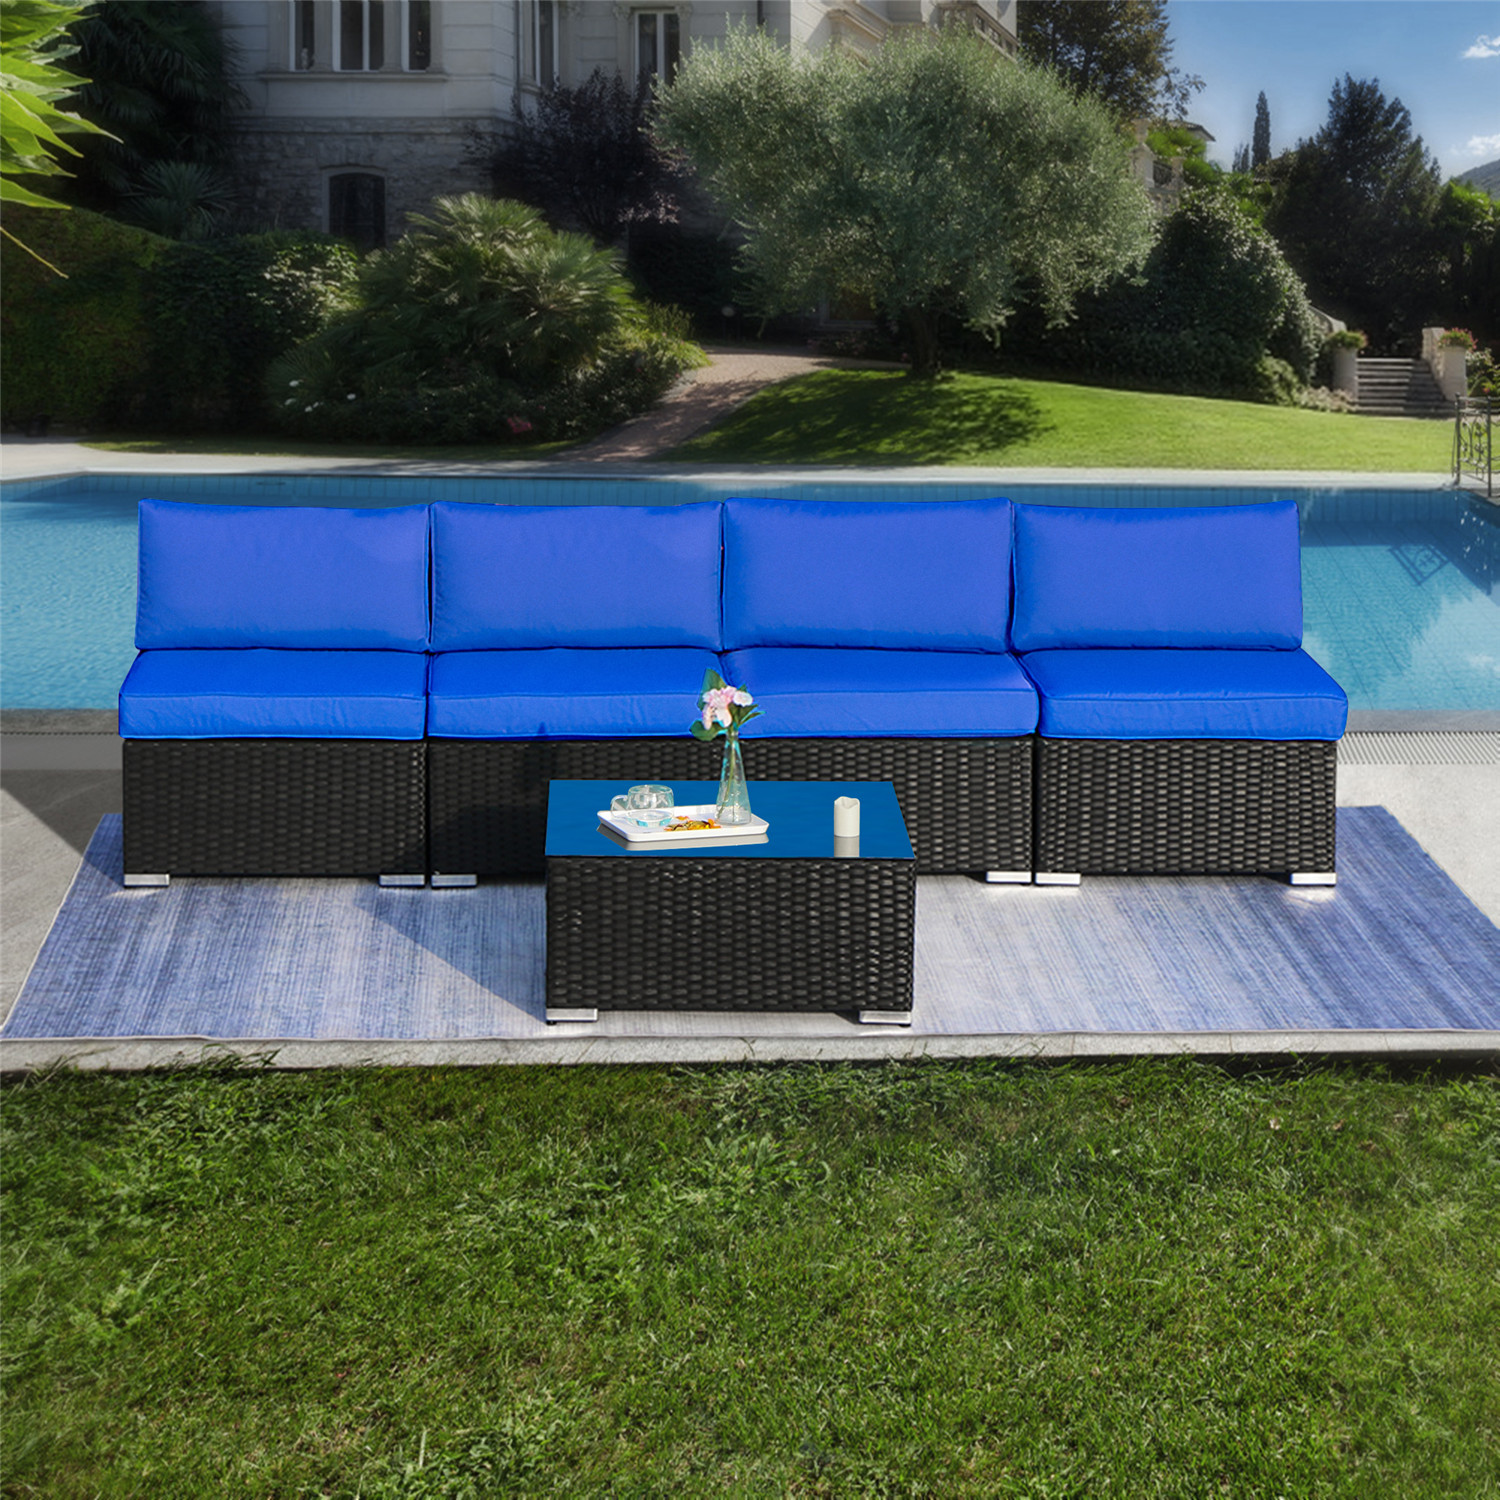 Cozyhom 5 Piece Patio Furniture Sets, All-Weather PE Wicker Rattan Outdoor Sectional Sofa with Coffee Table & Washable Couch Cushions, Royal Blue - image 3 of 5